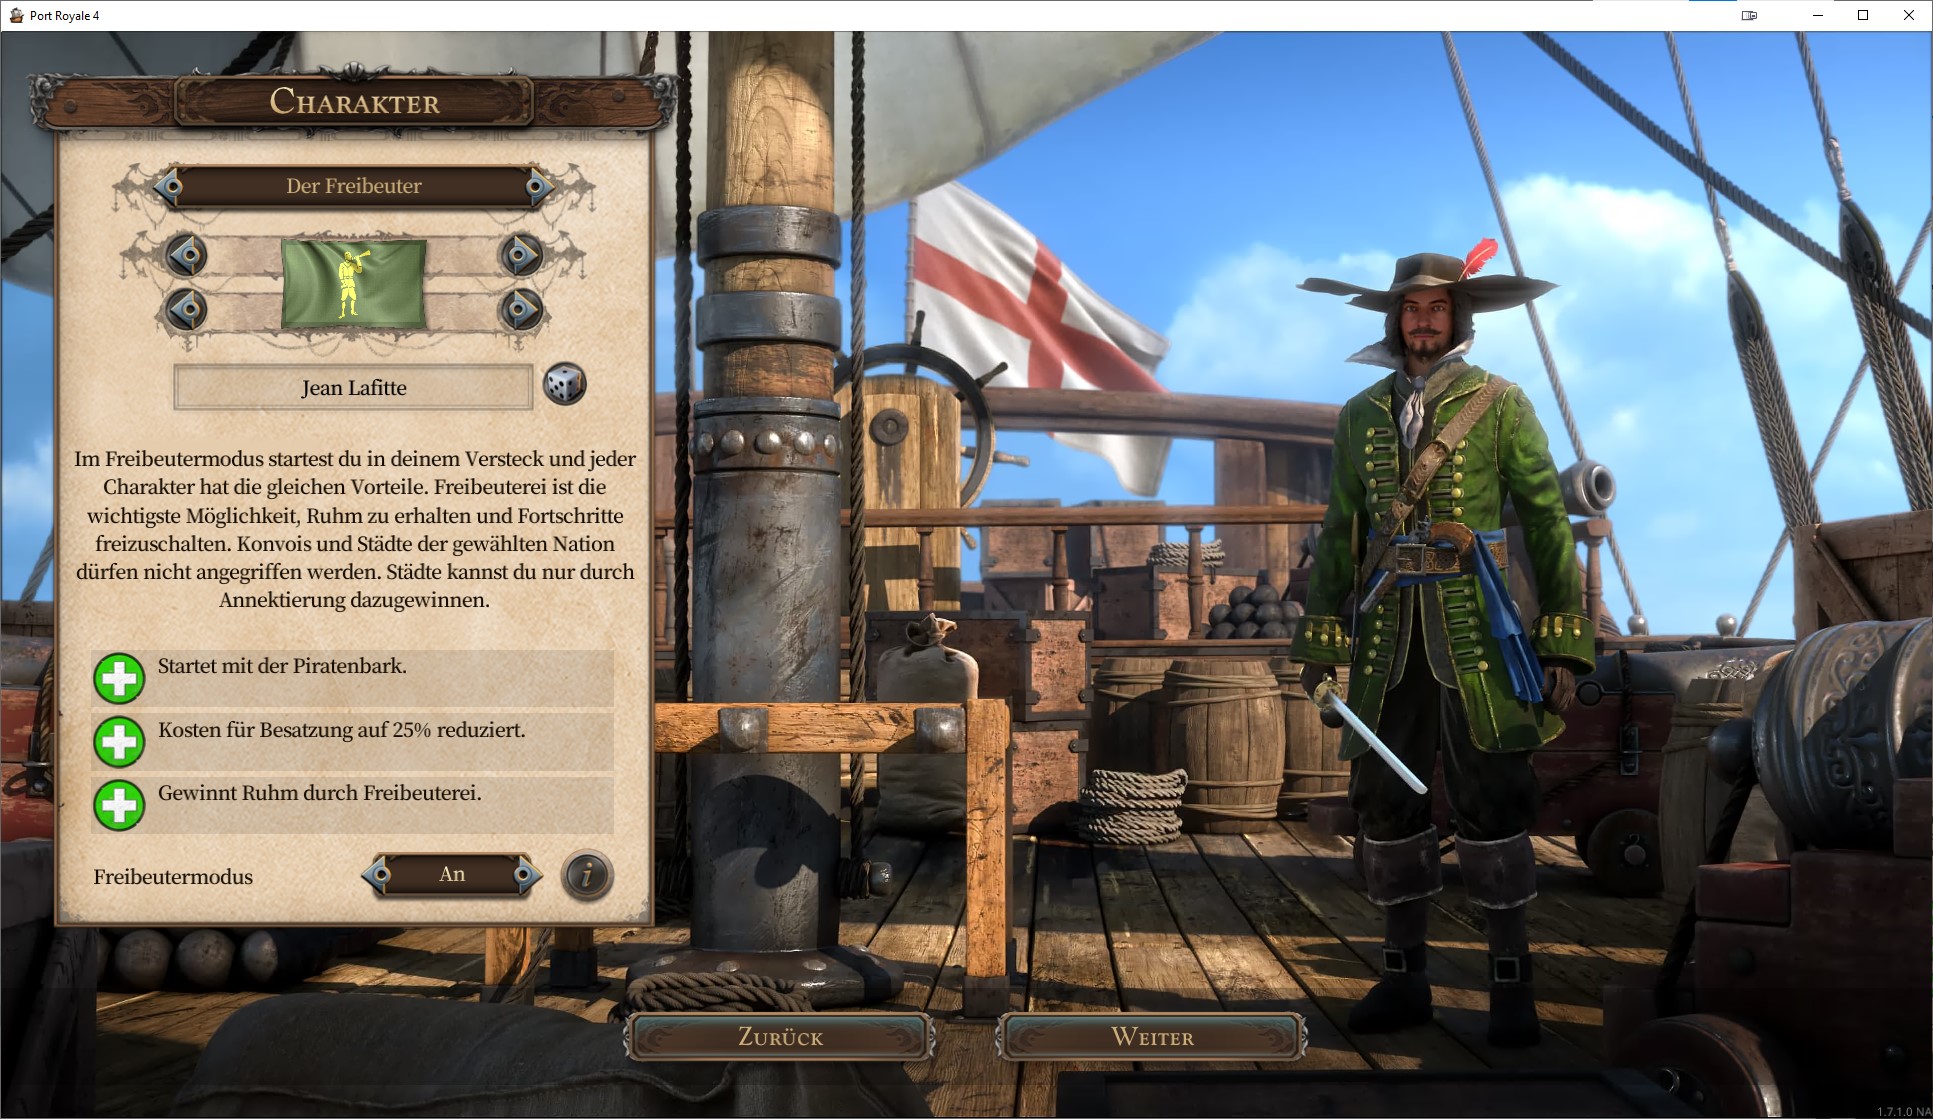 Screenshot: Port Royale 4 Character Selection with Buccaneer option